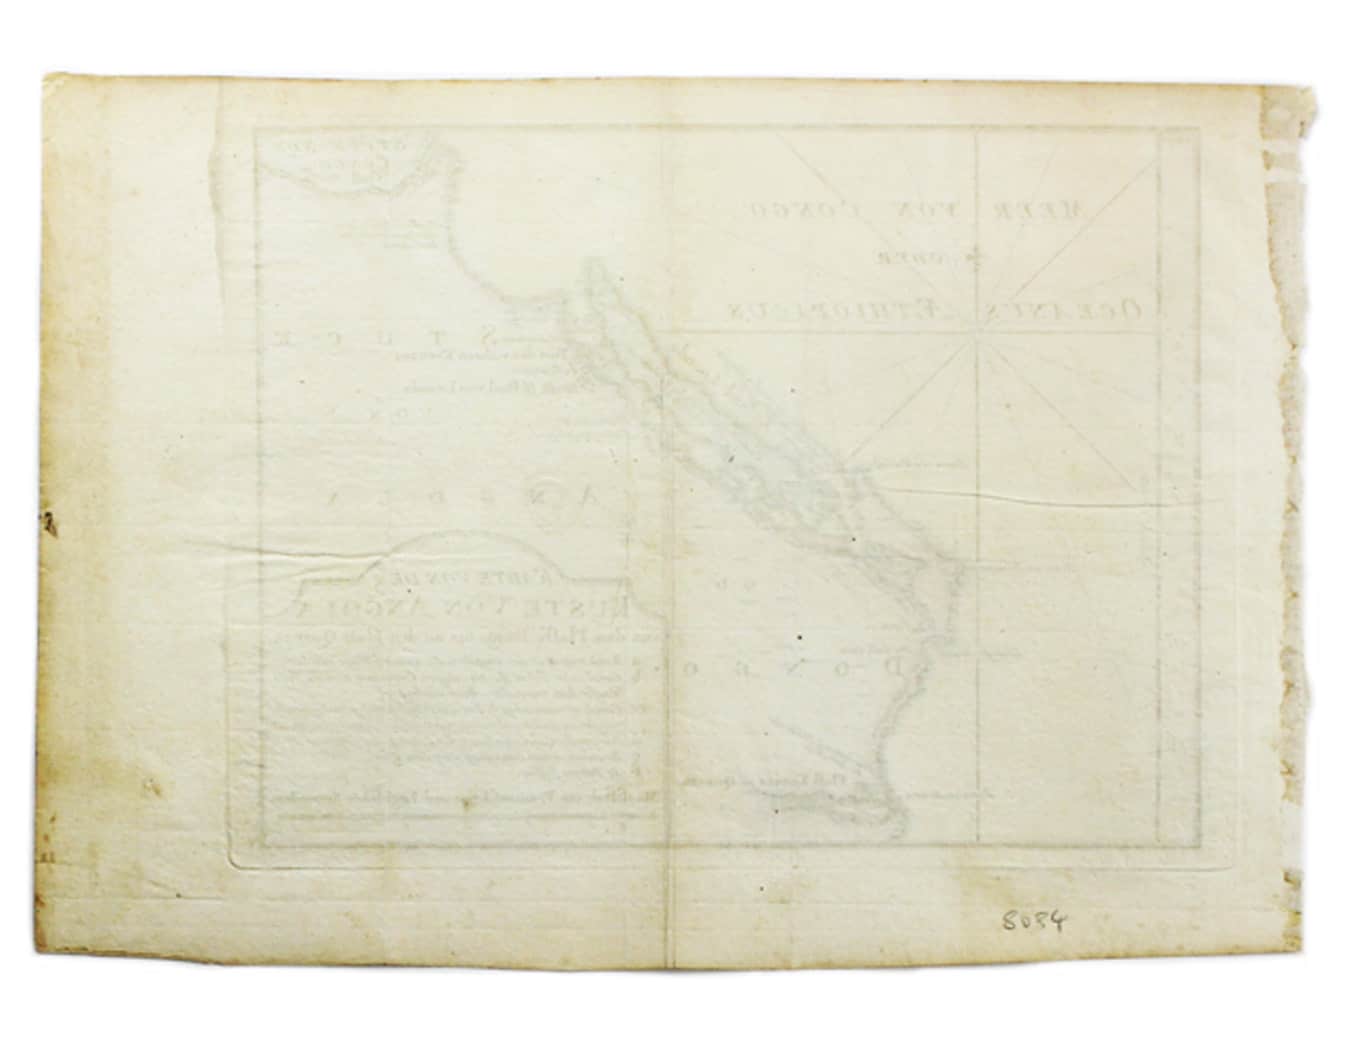 Bellin’s Map of Angola